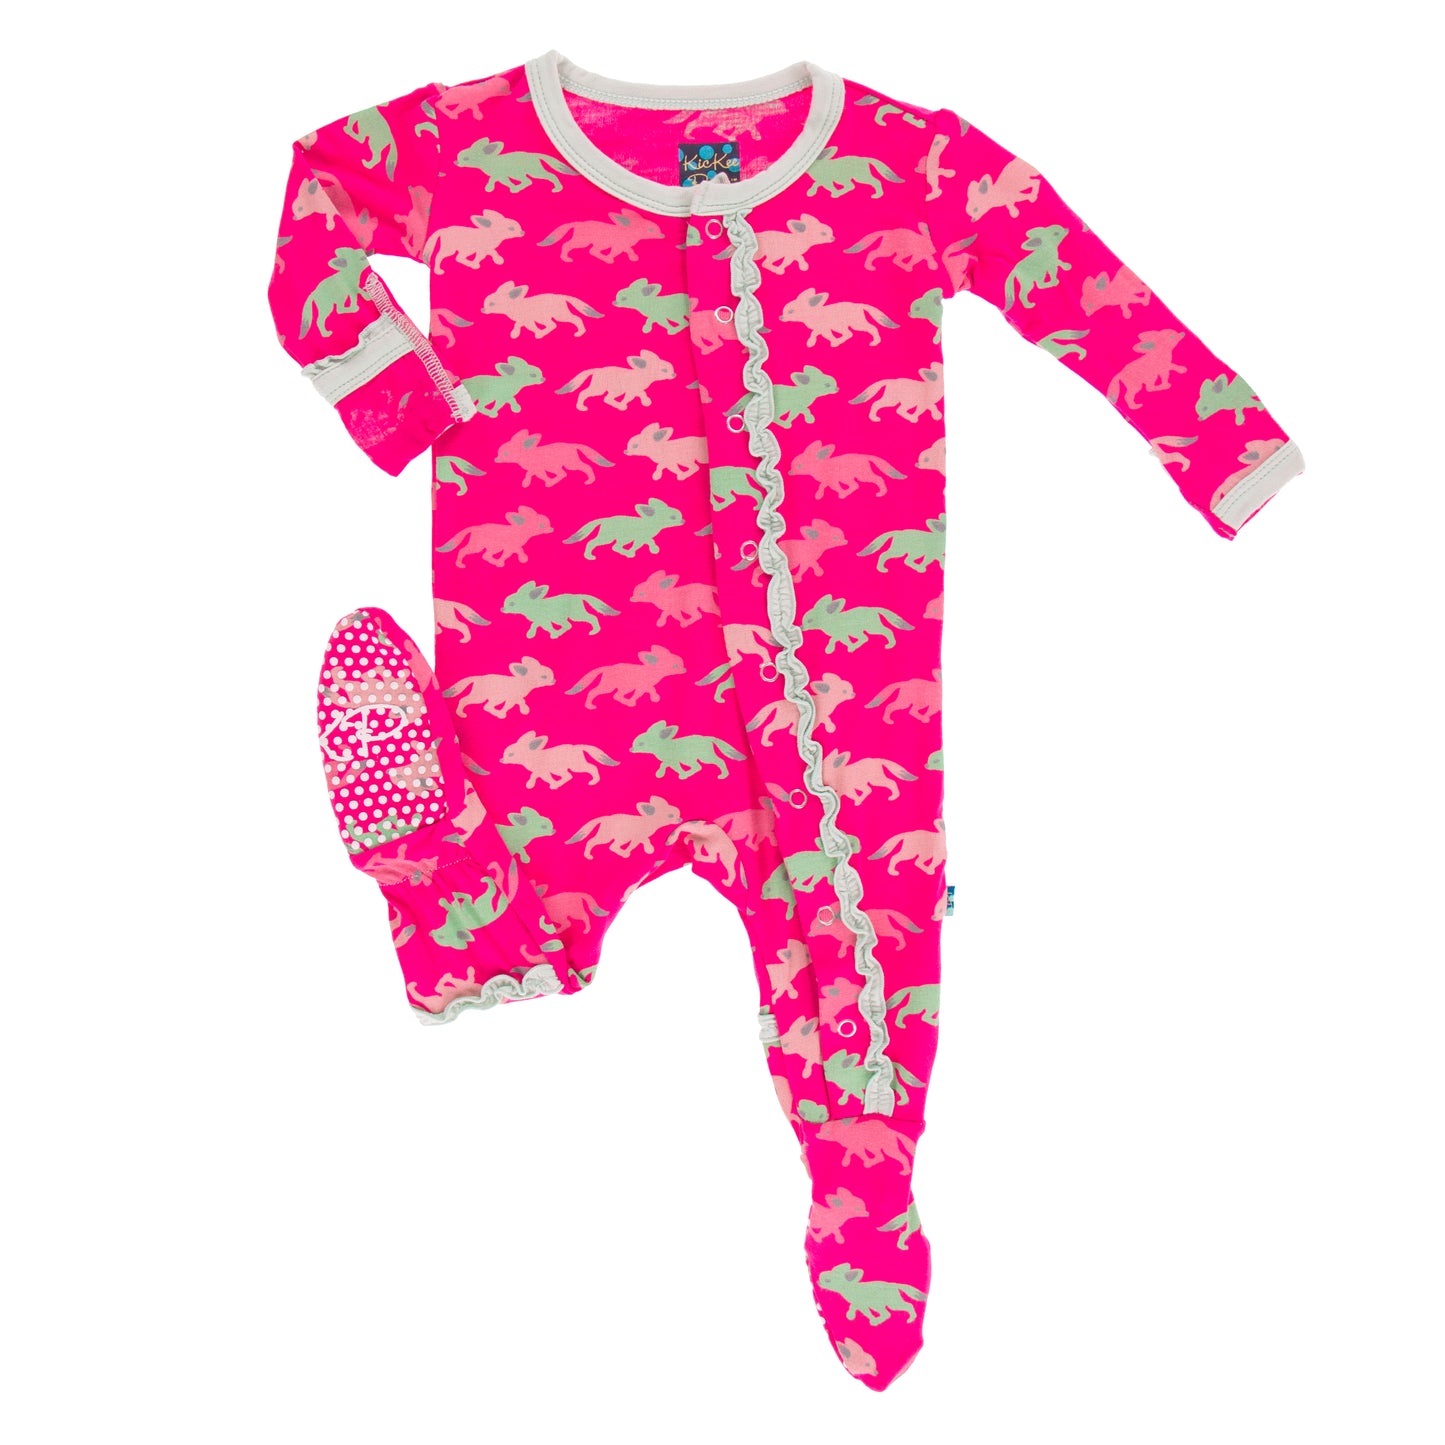 Kickee Pants Print Muffin Ruffle Footie with Snaps: Prickly Pear Desert Fox